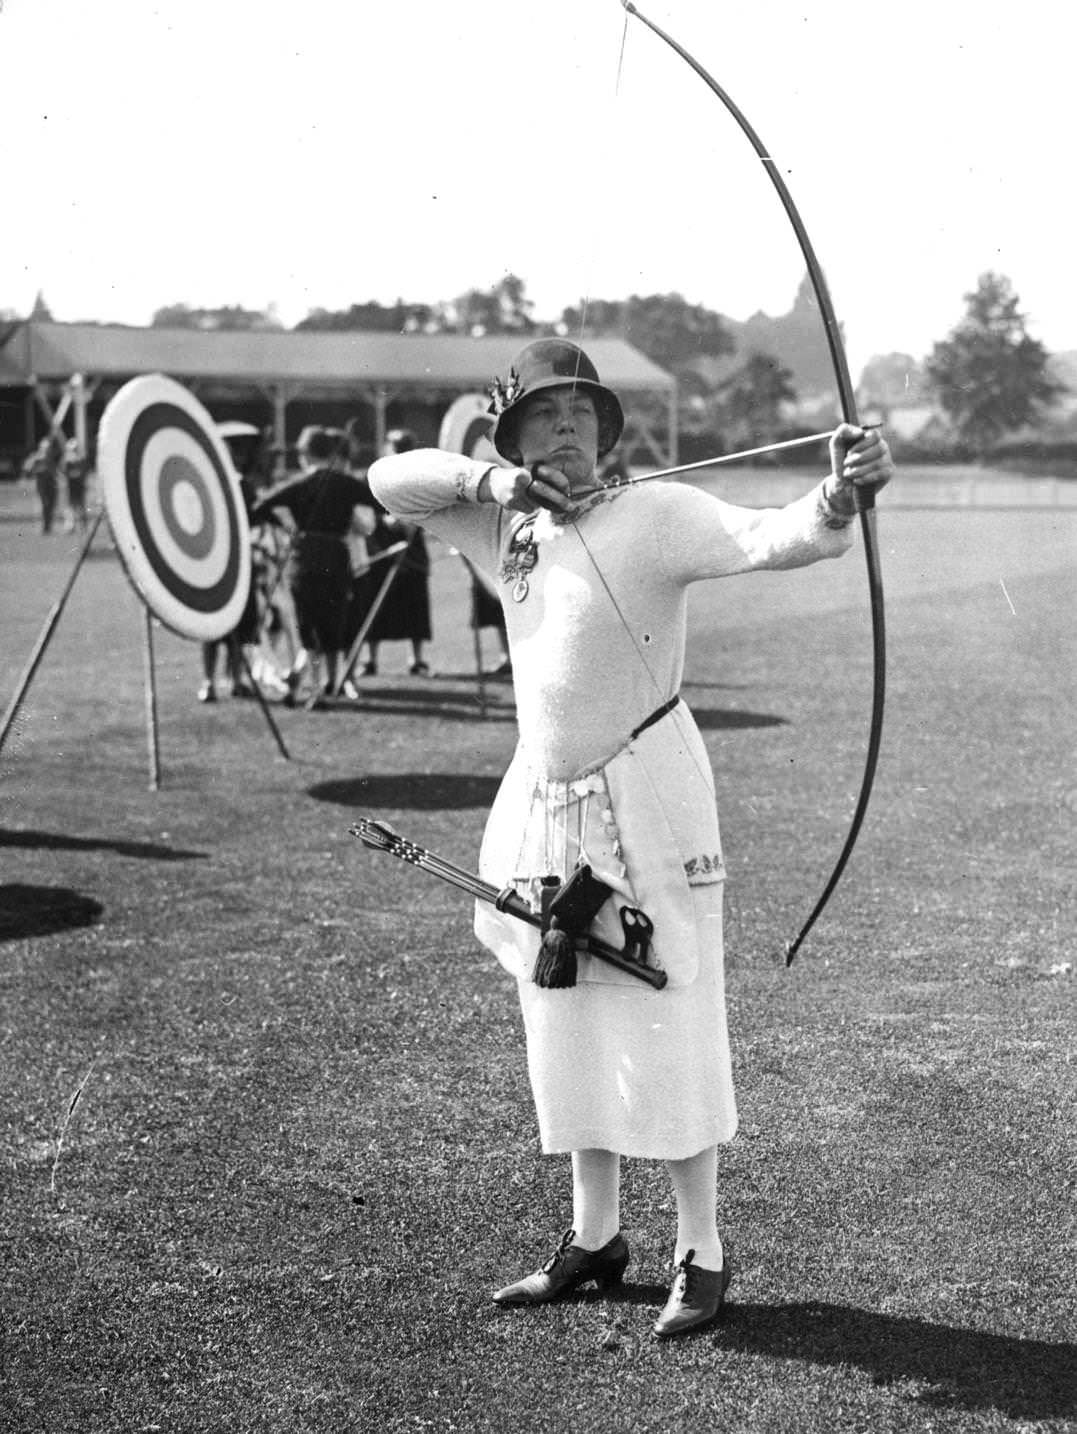 Miss V M Rushton pulls a bow at the Tunbridge Wells Archery Contest in Kent, 1920